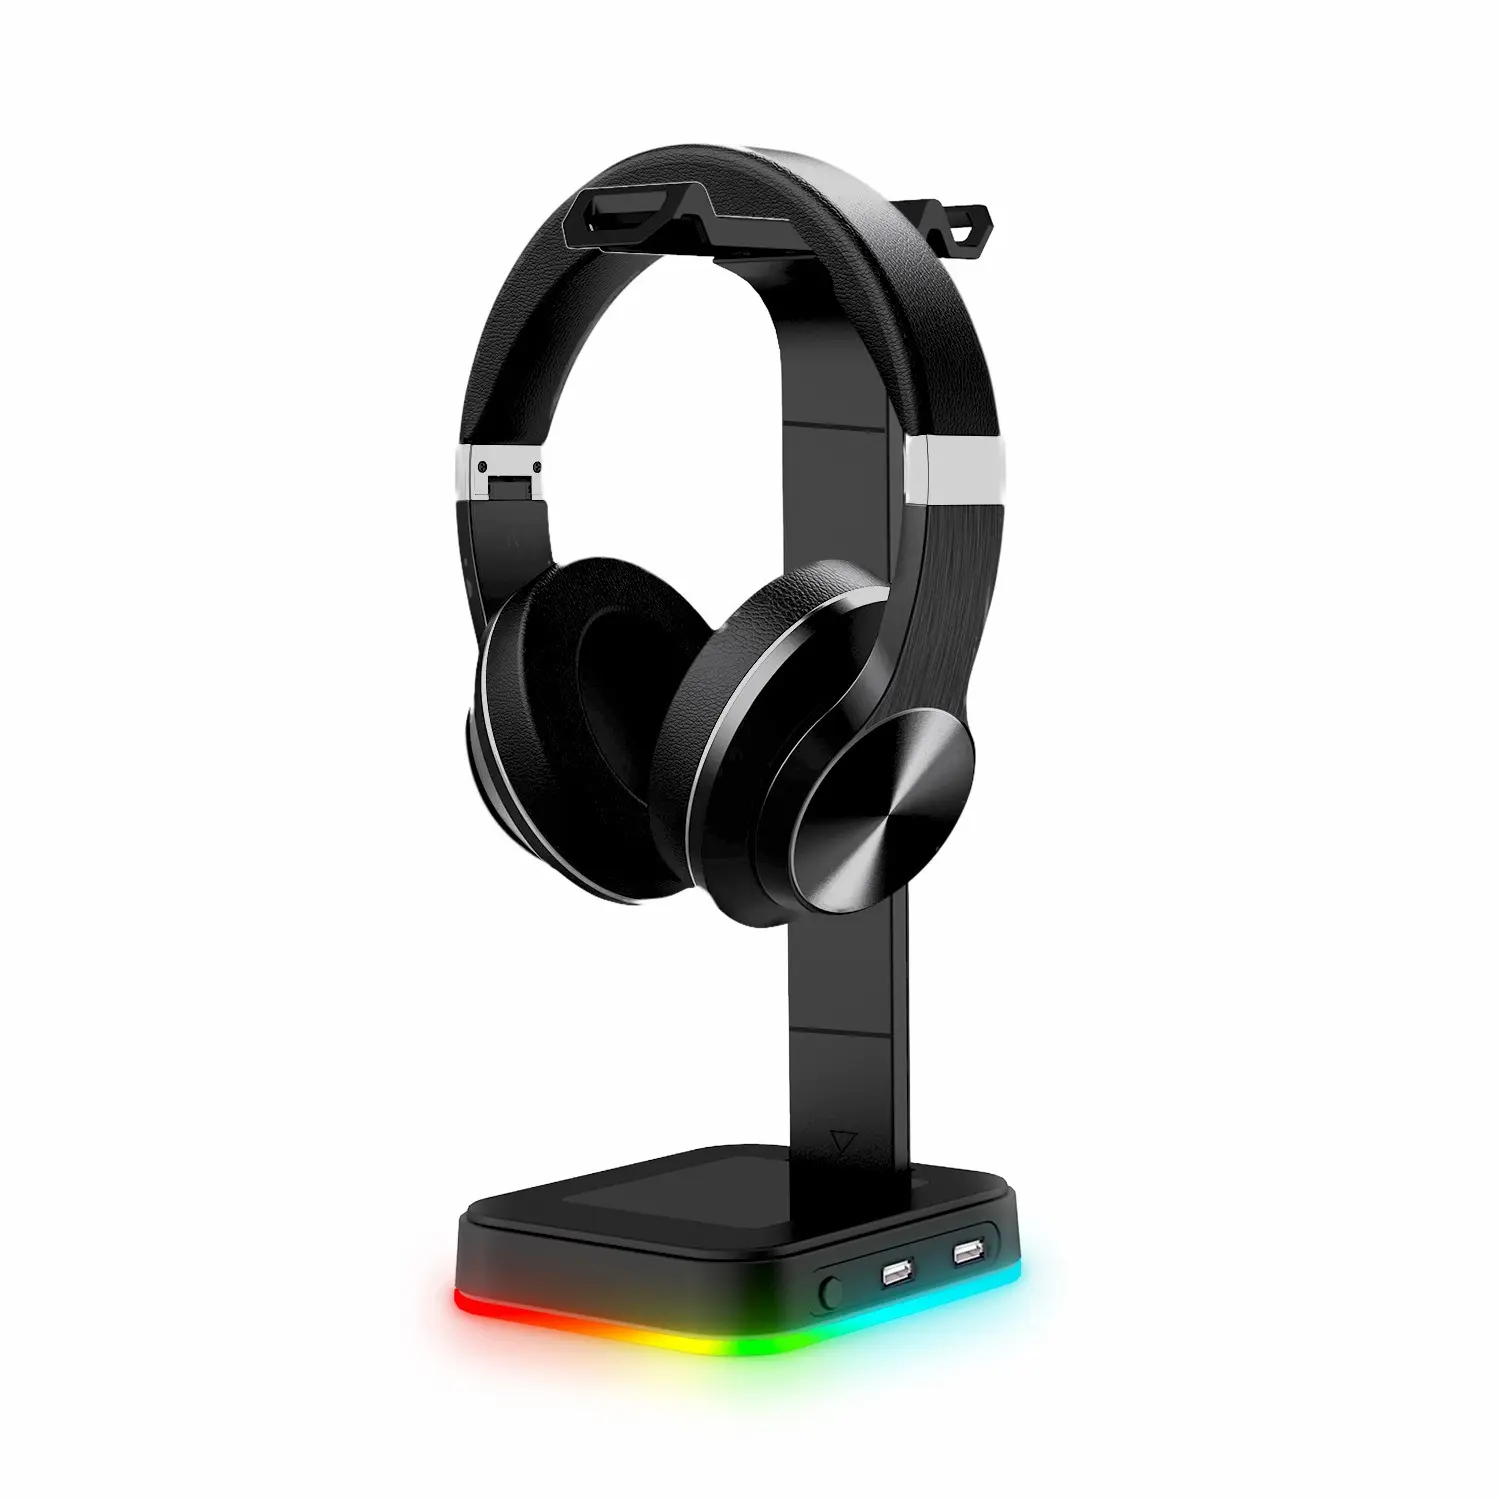 Dropshipping 2 USB Port RGB Headphone Stand RGB Backlit Gaming Headphone Headset Display Stand For Gamer